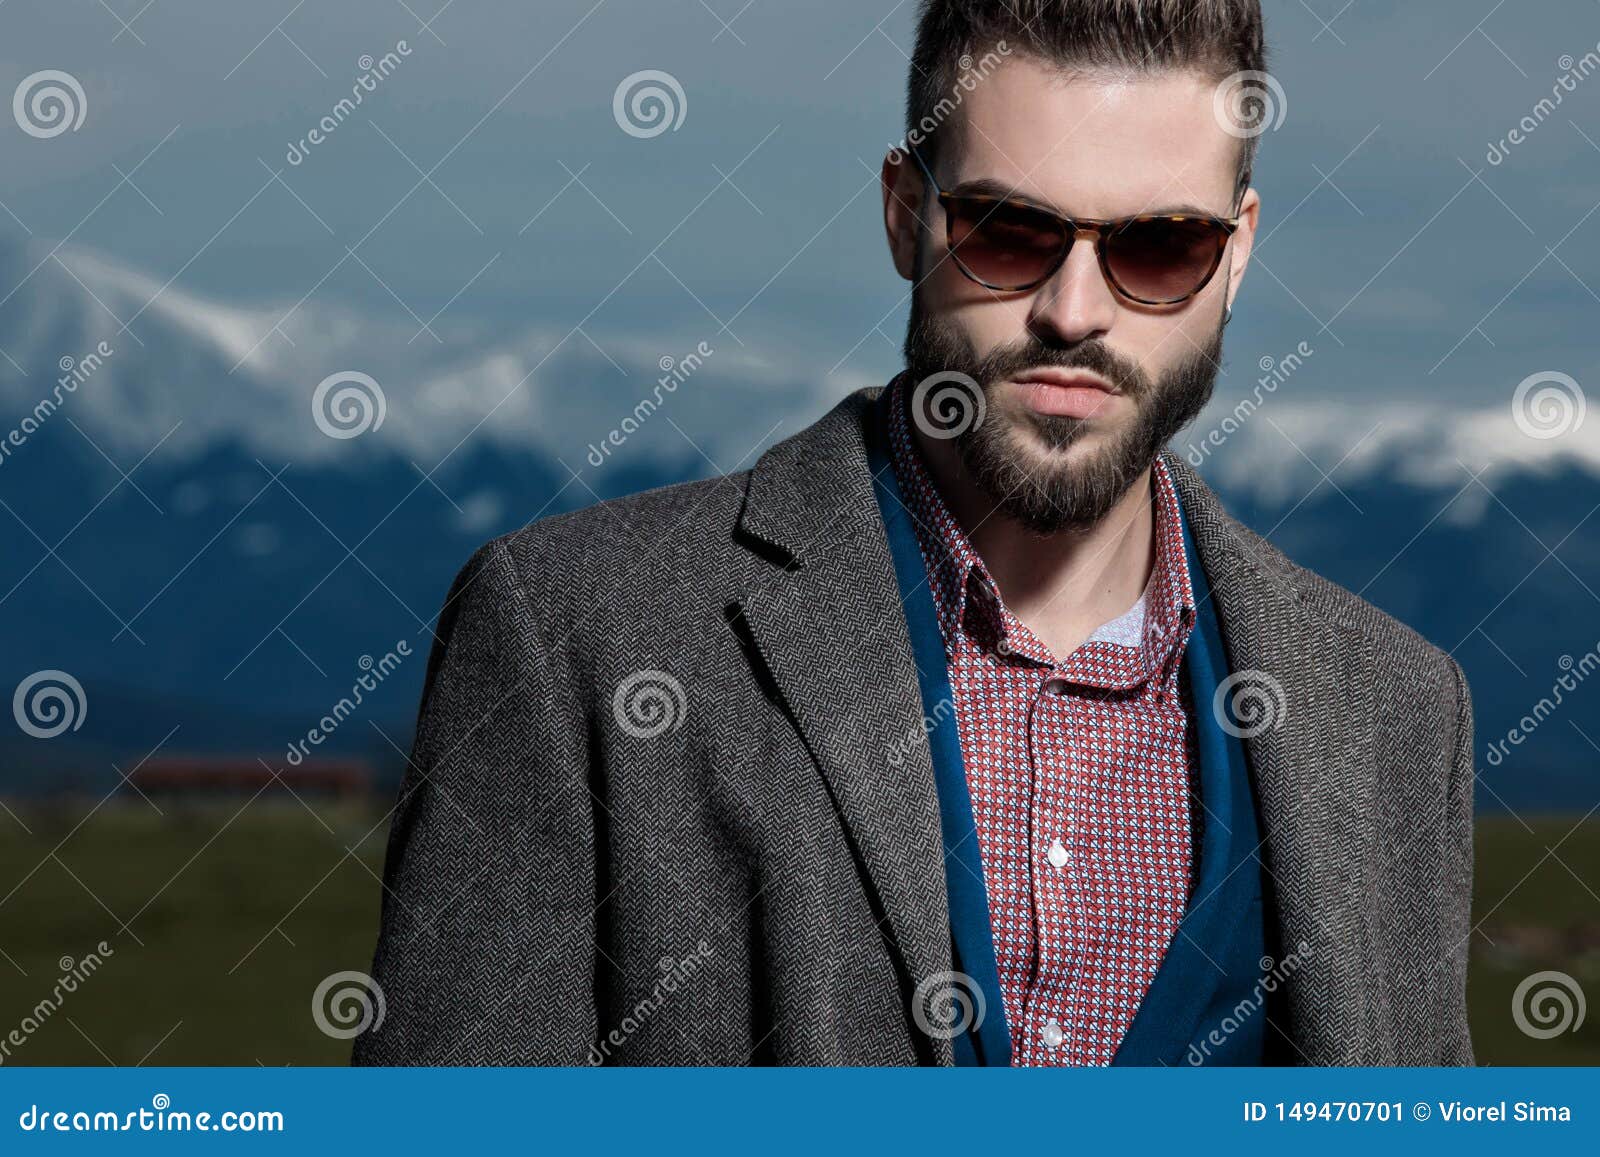 Close Up of Serious Looking Man Staring To the Camera Stock Image ...